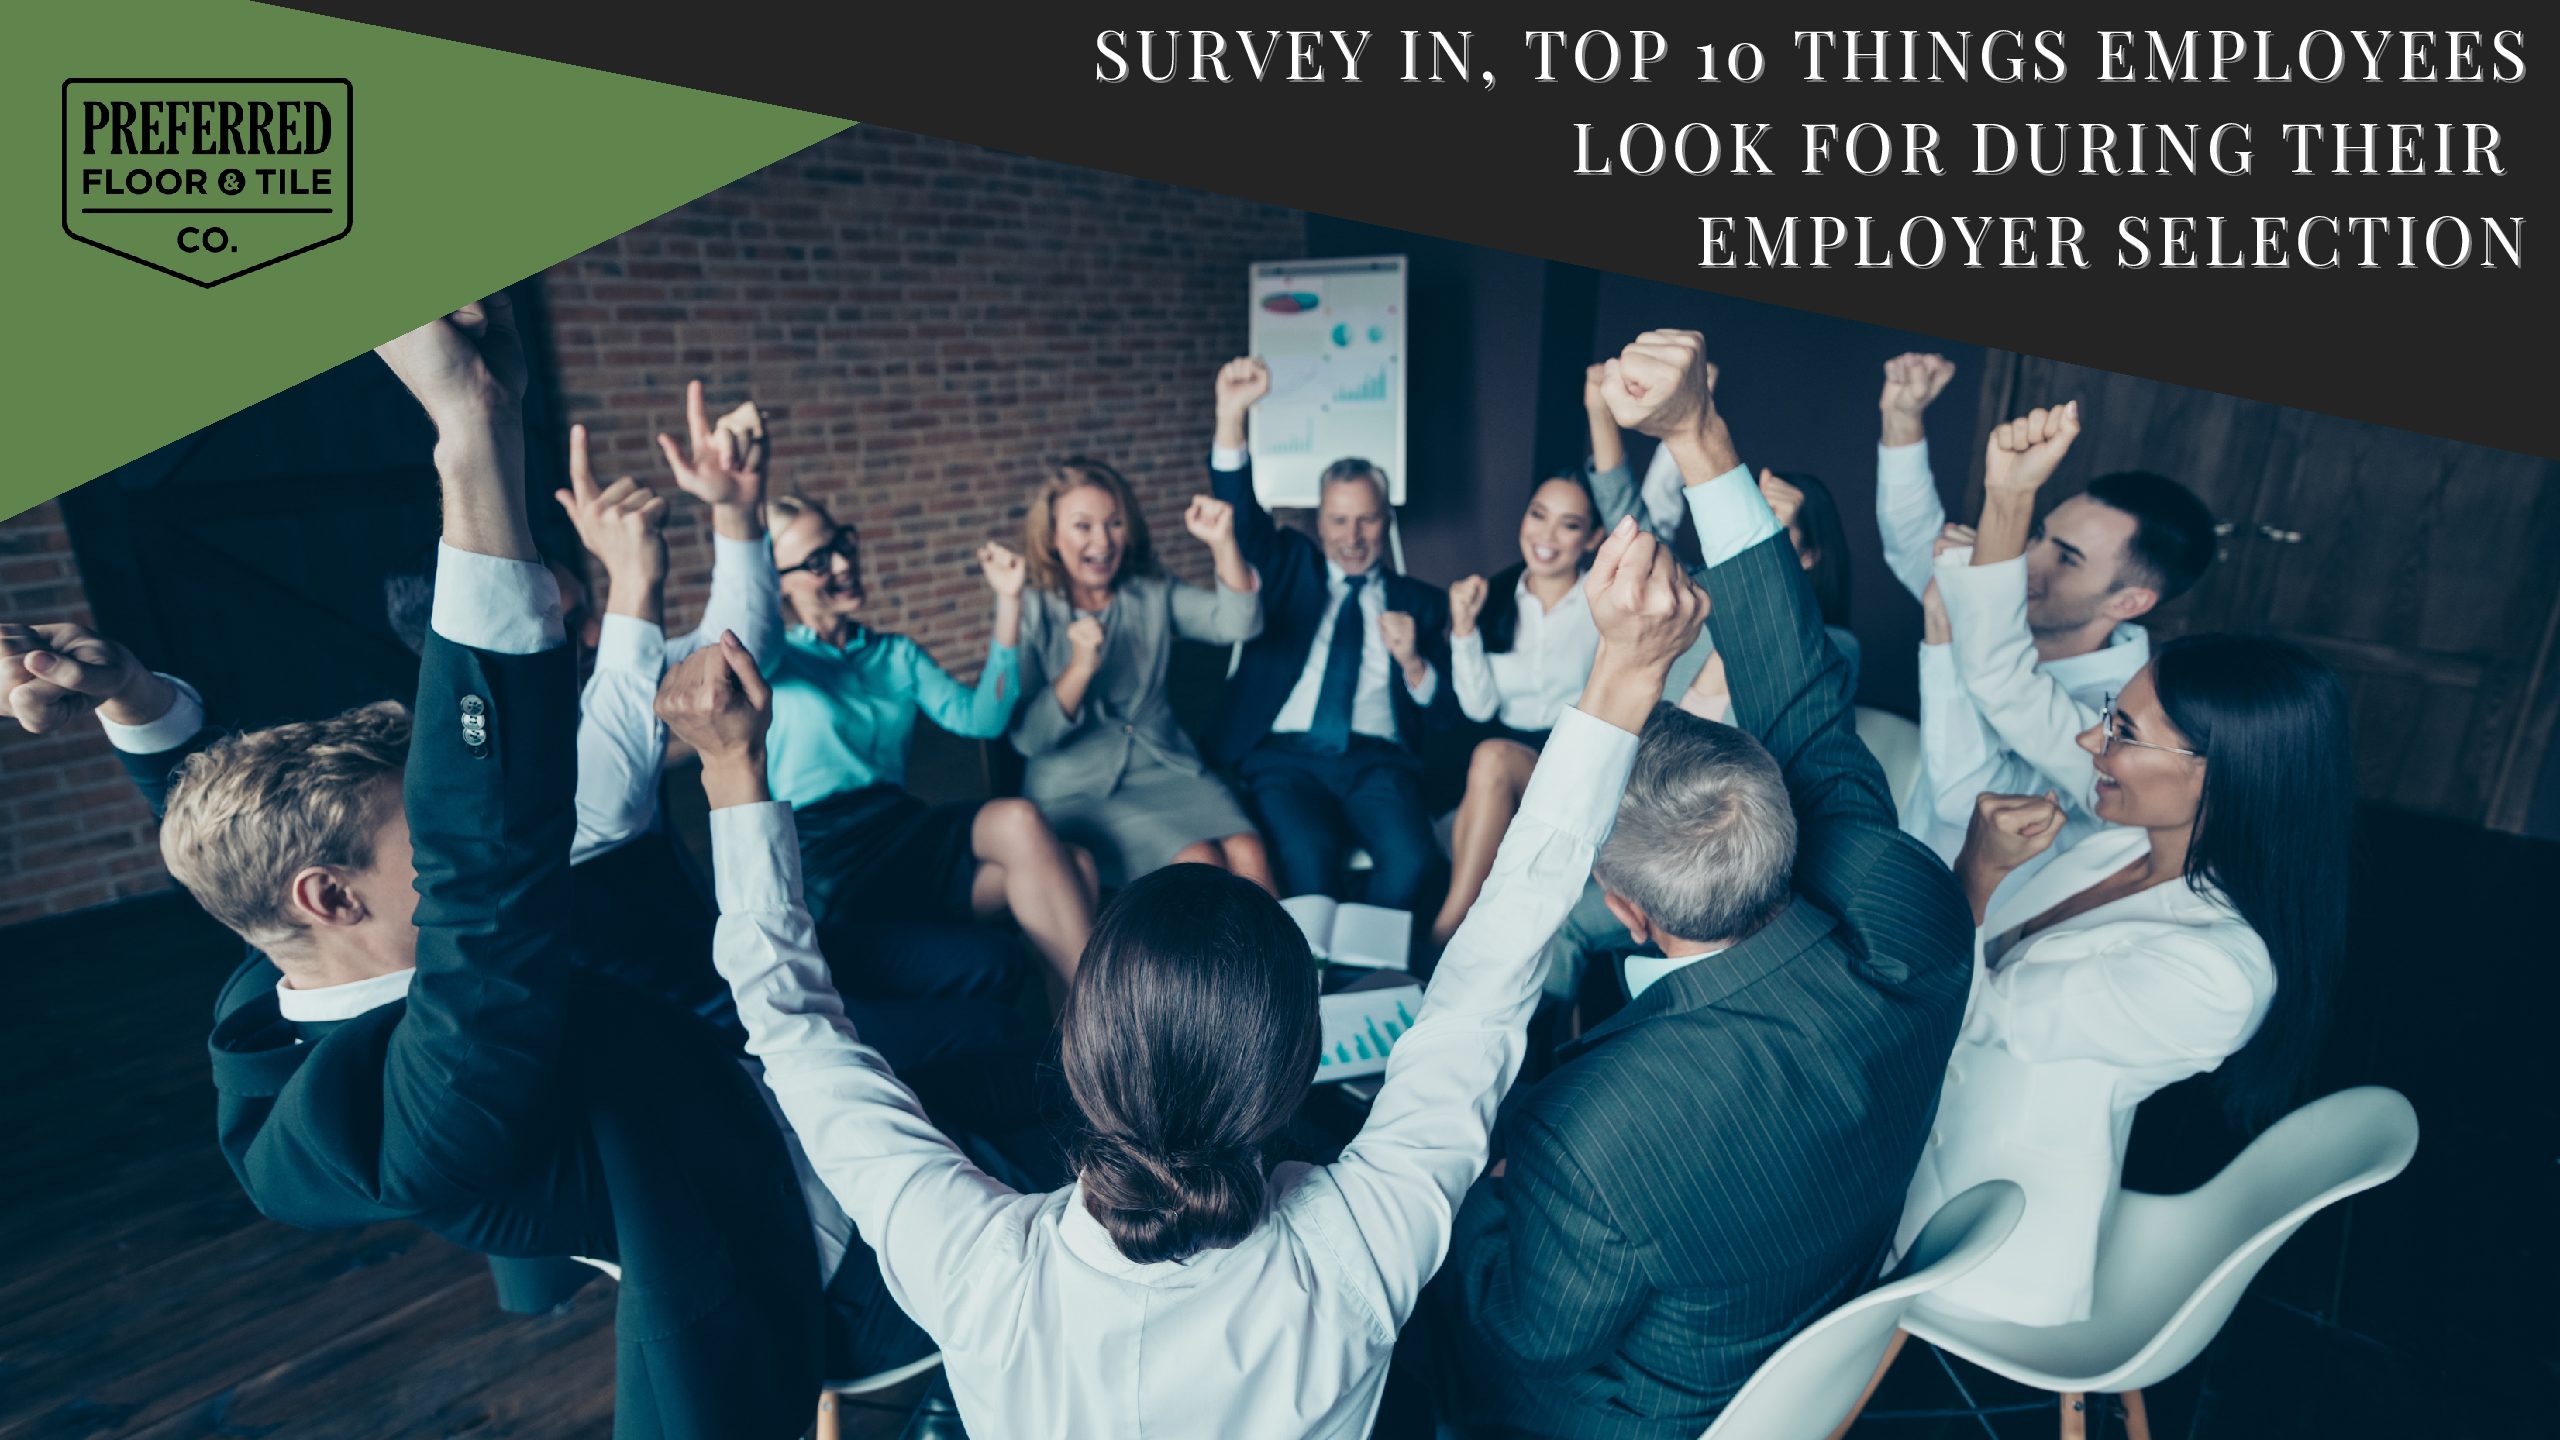 Survey In, Top 10 Things Employees Look for During Their Employer Selection